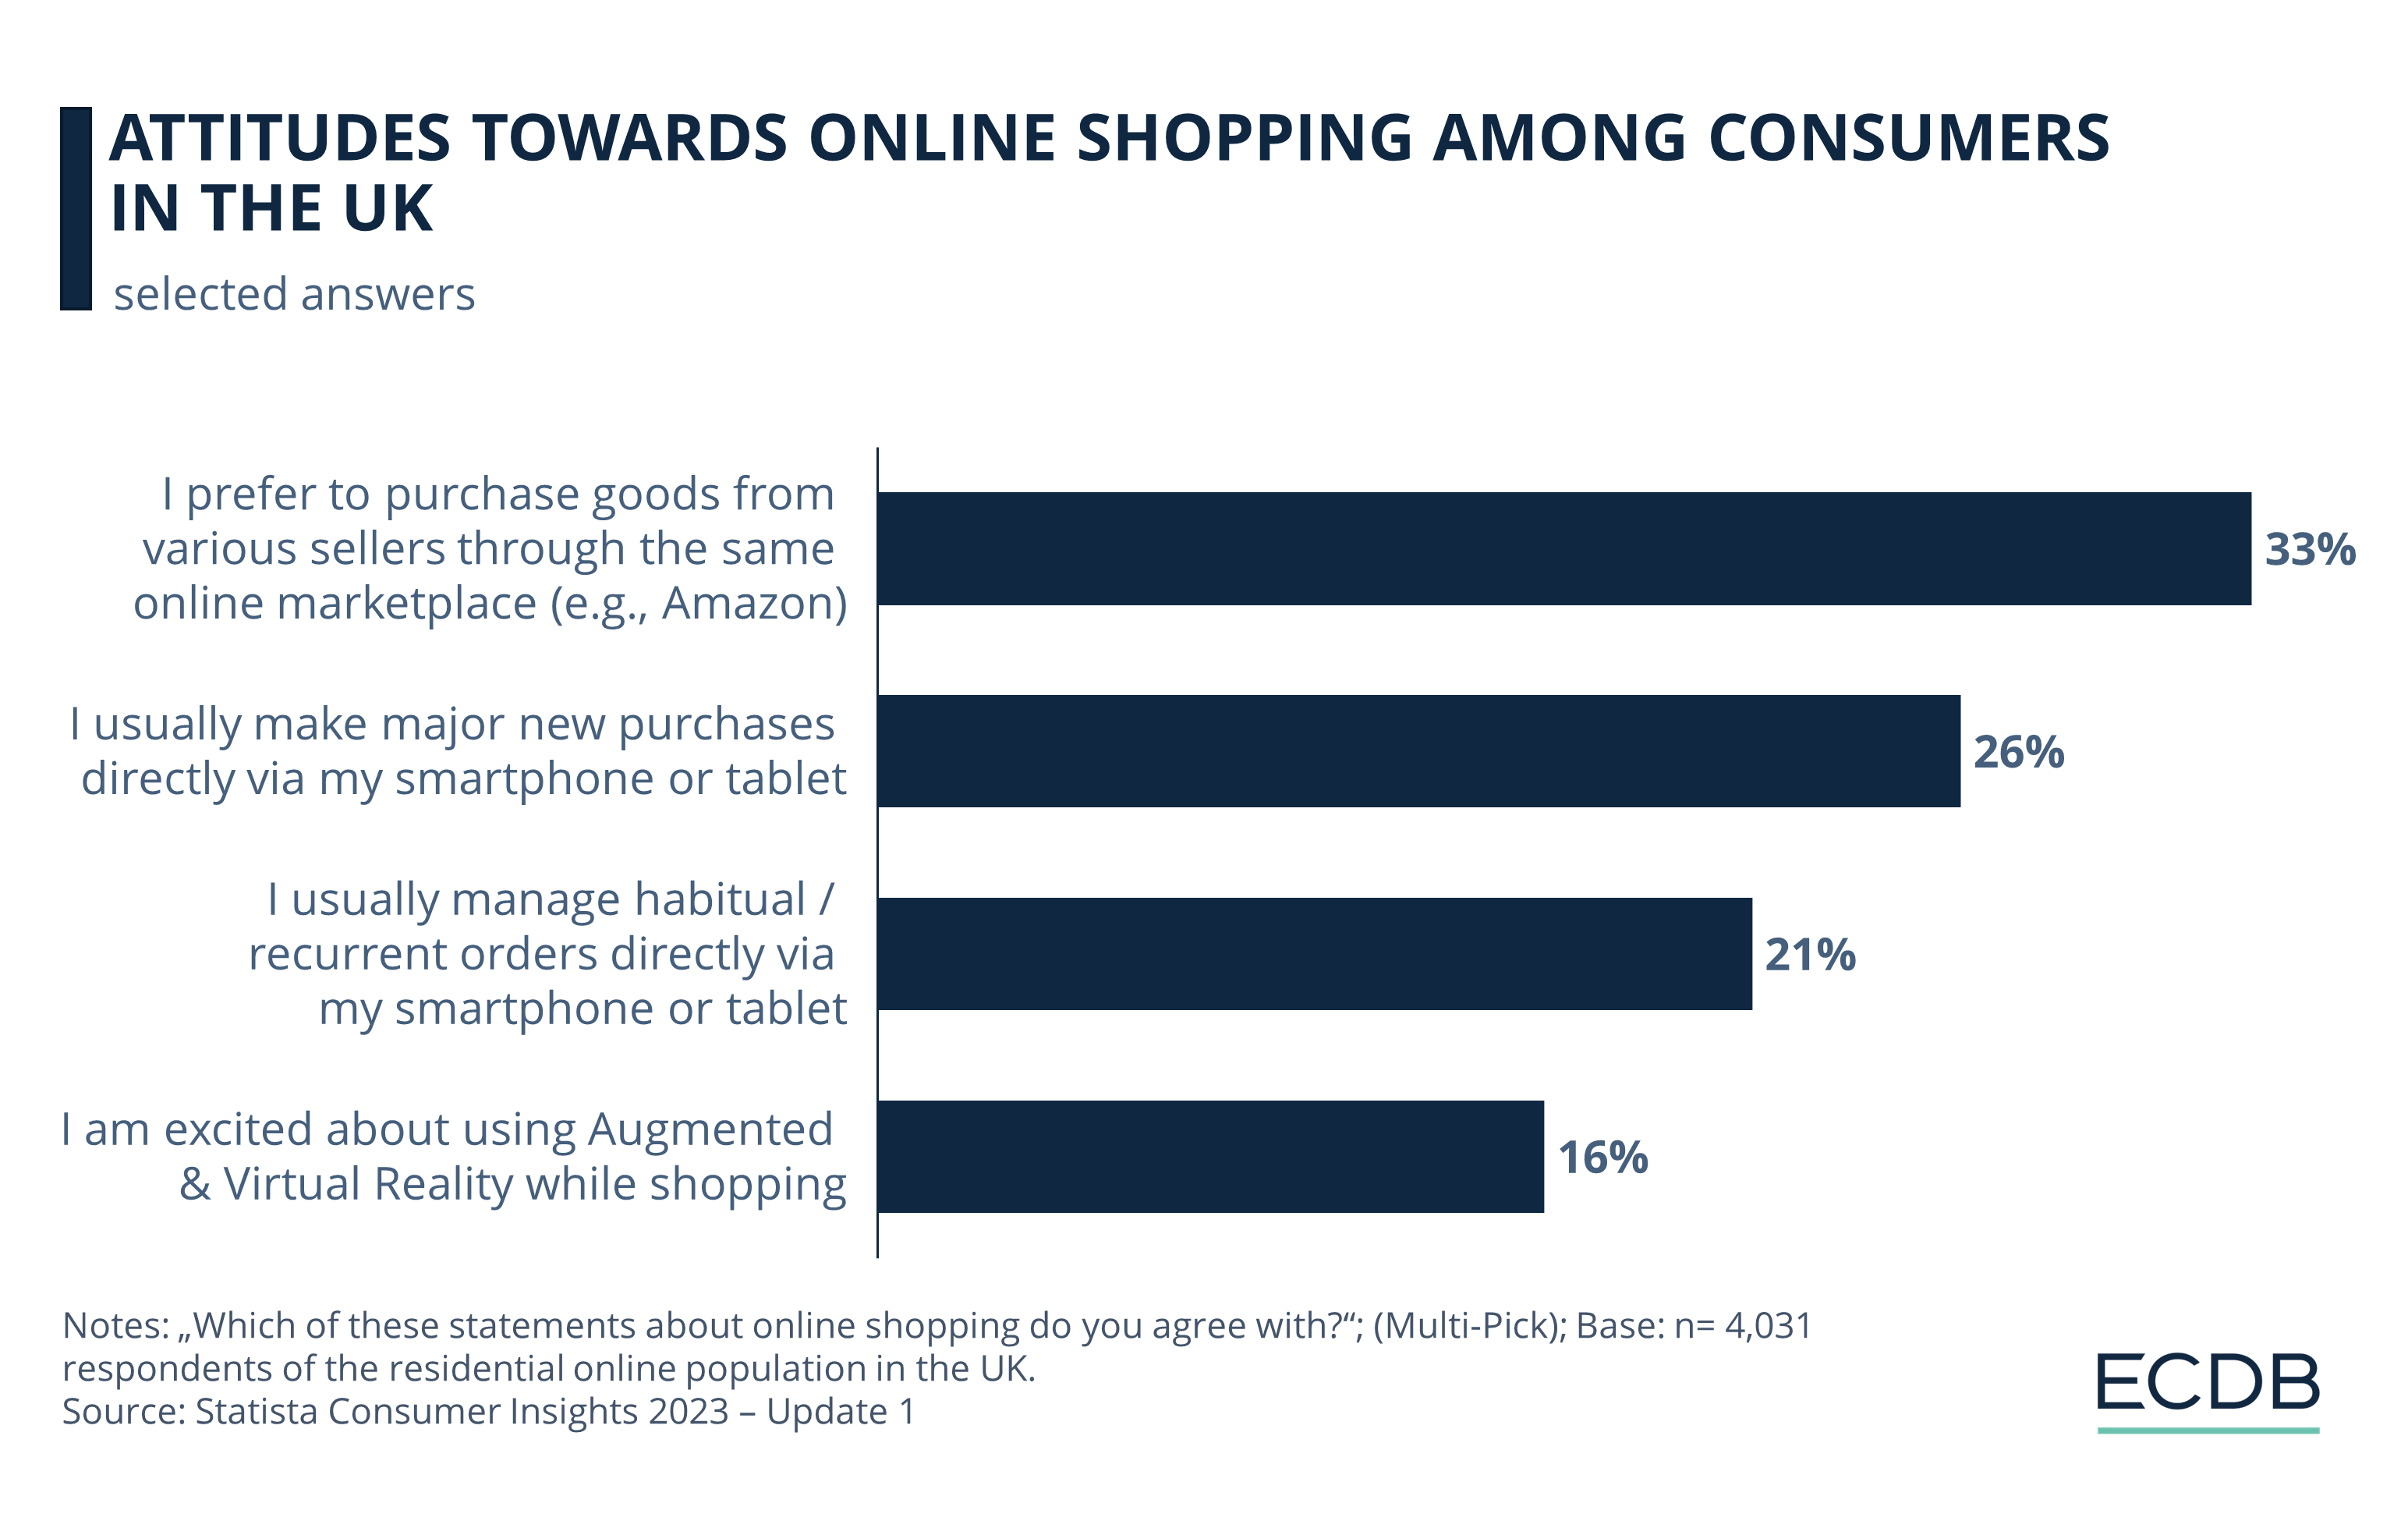 Attitudes Towards Online Shopping Among Consumers in the UK